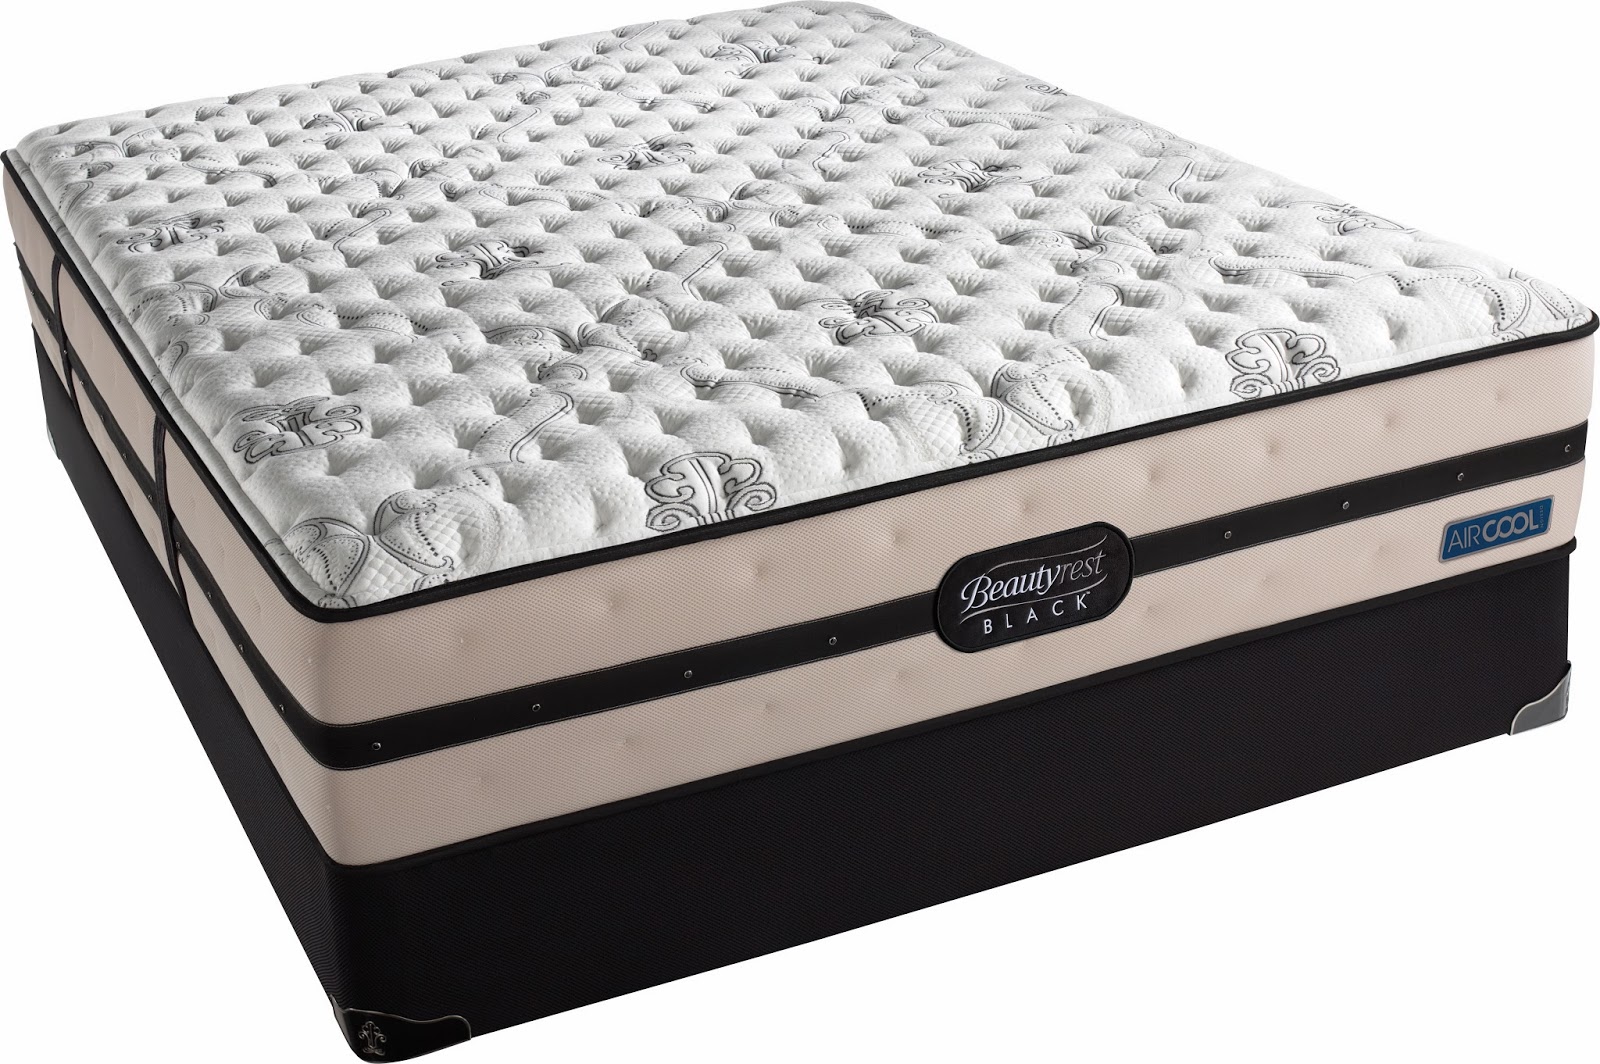  I am inwards the marketplace for a novel mattress in addition to direct maintain but flora your website Simmons Beautyrest Black Ansleigh Luxury Firm Mattress